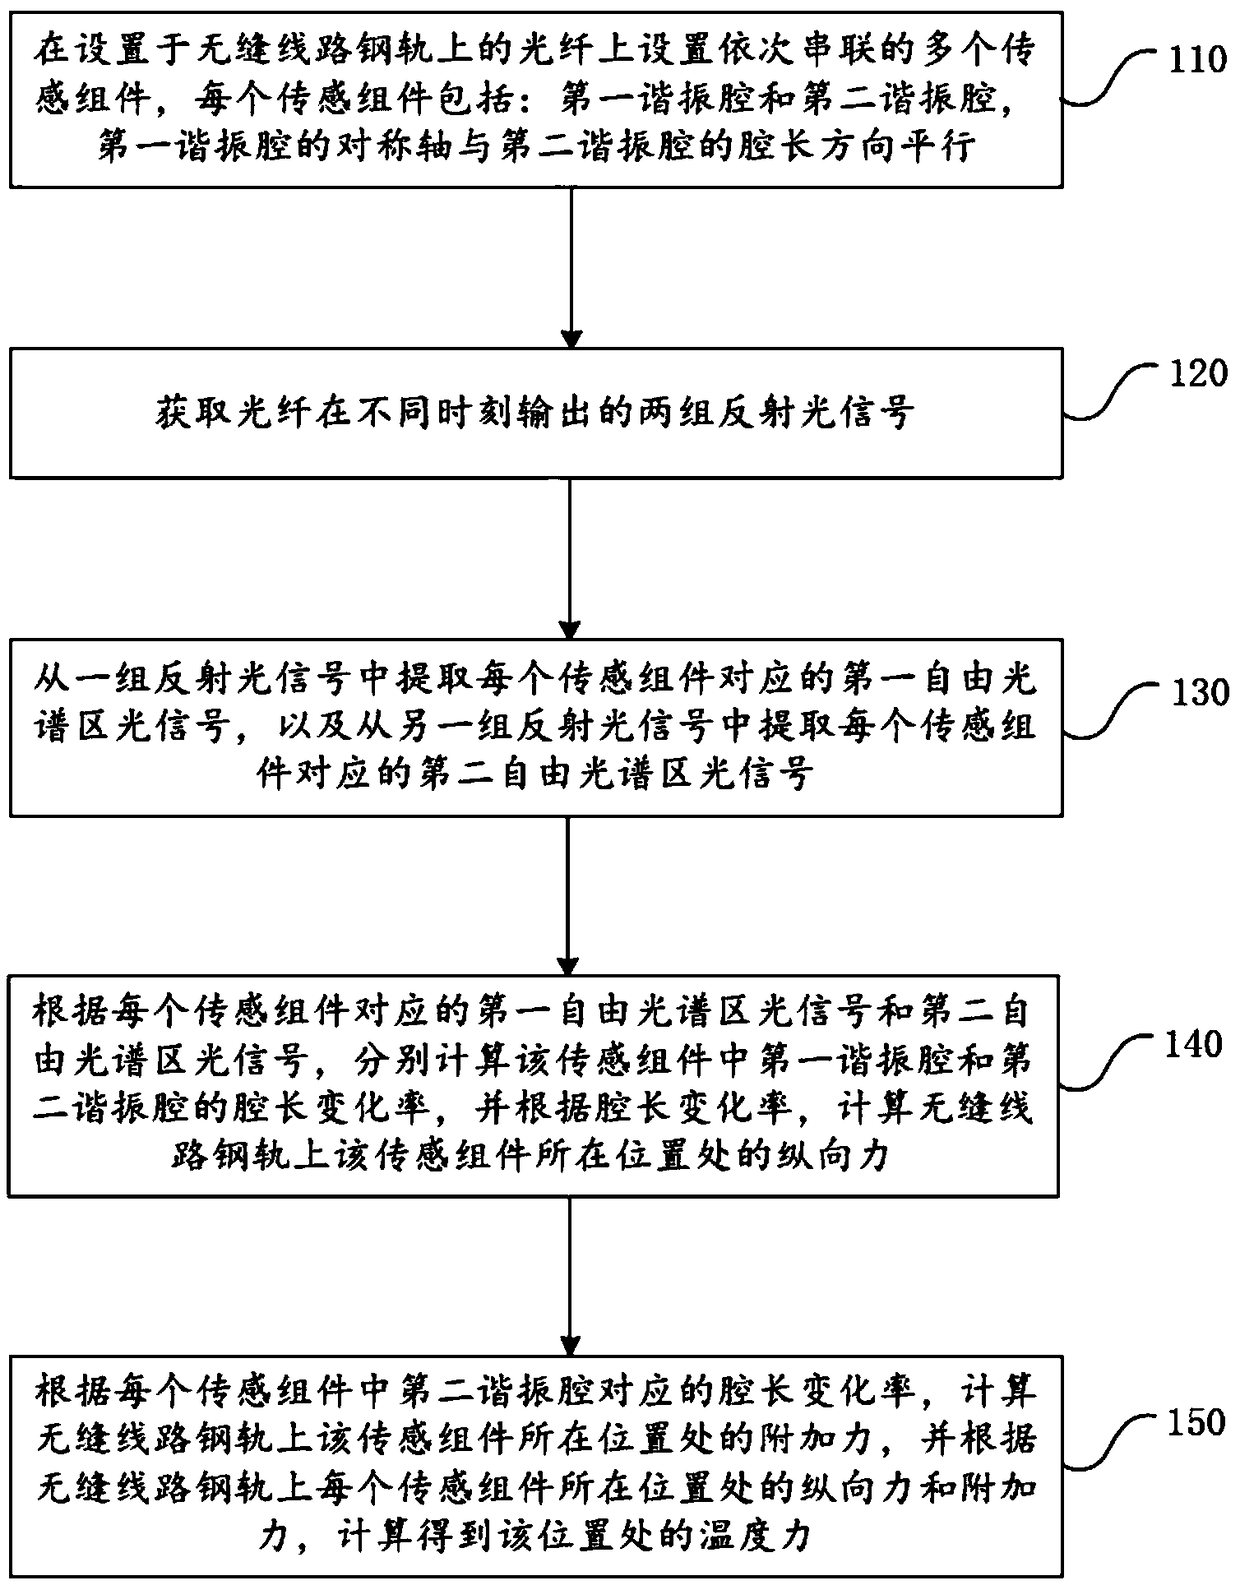 Continuous welded rail temperature force and additional force testing method and system